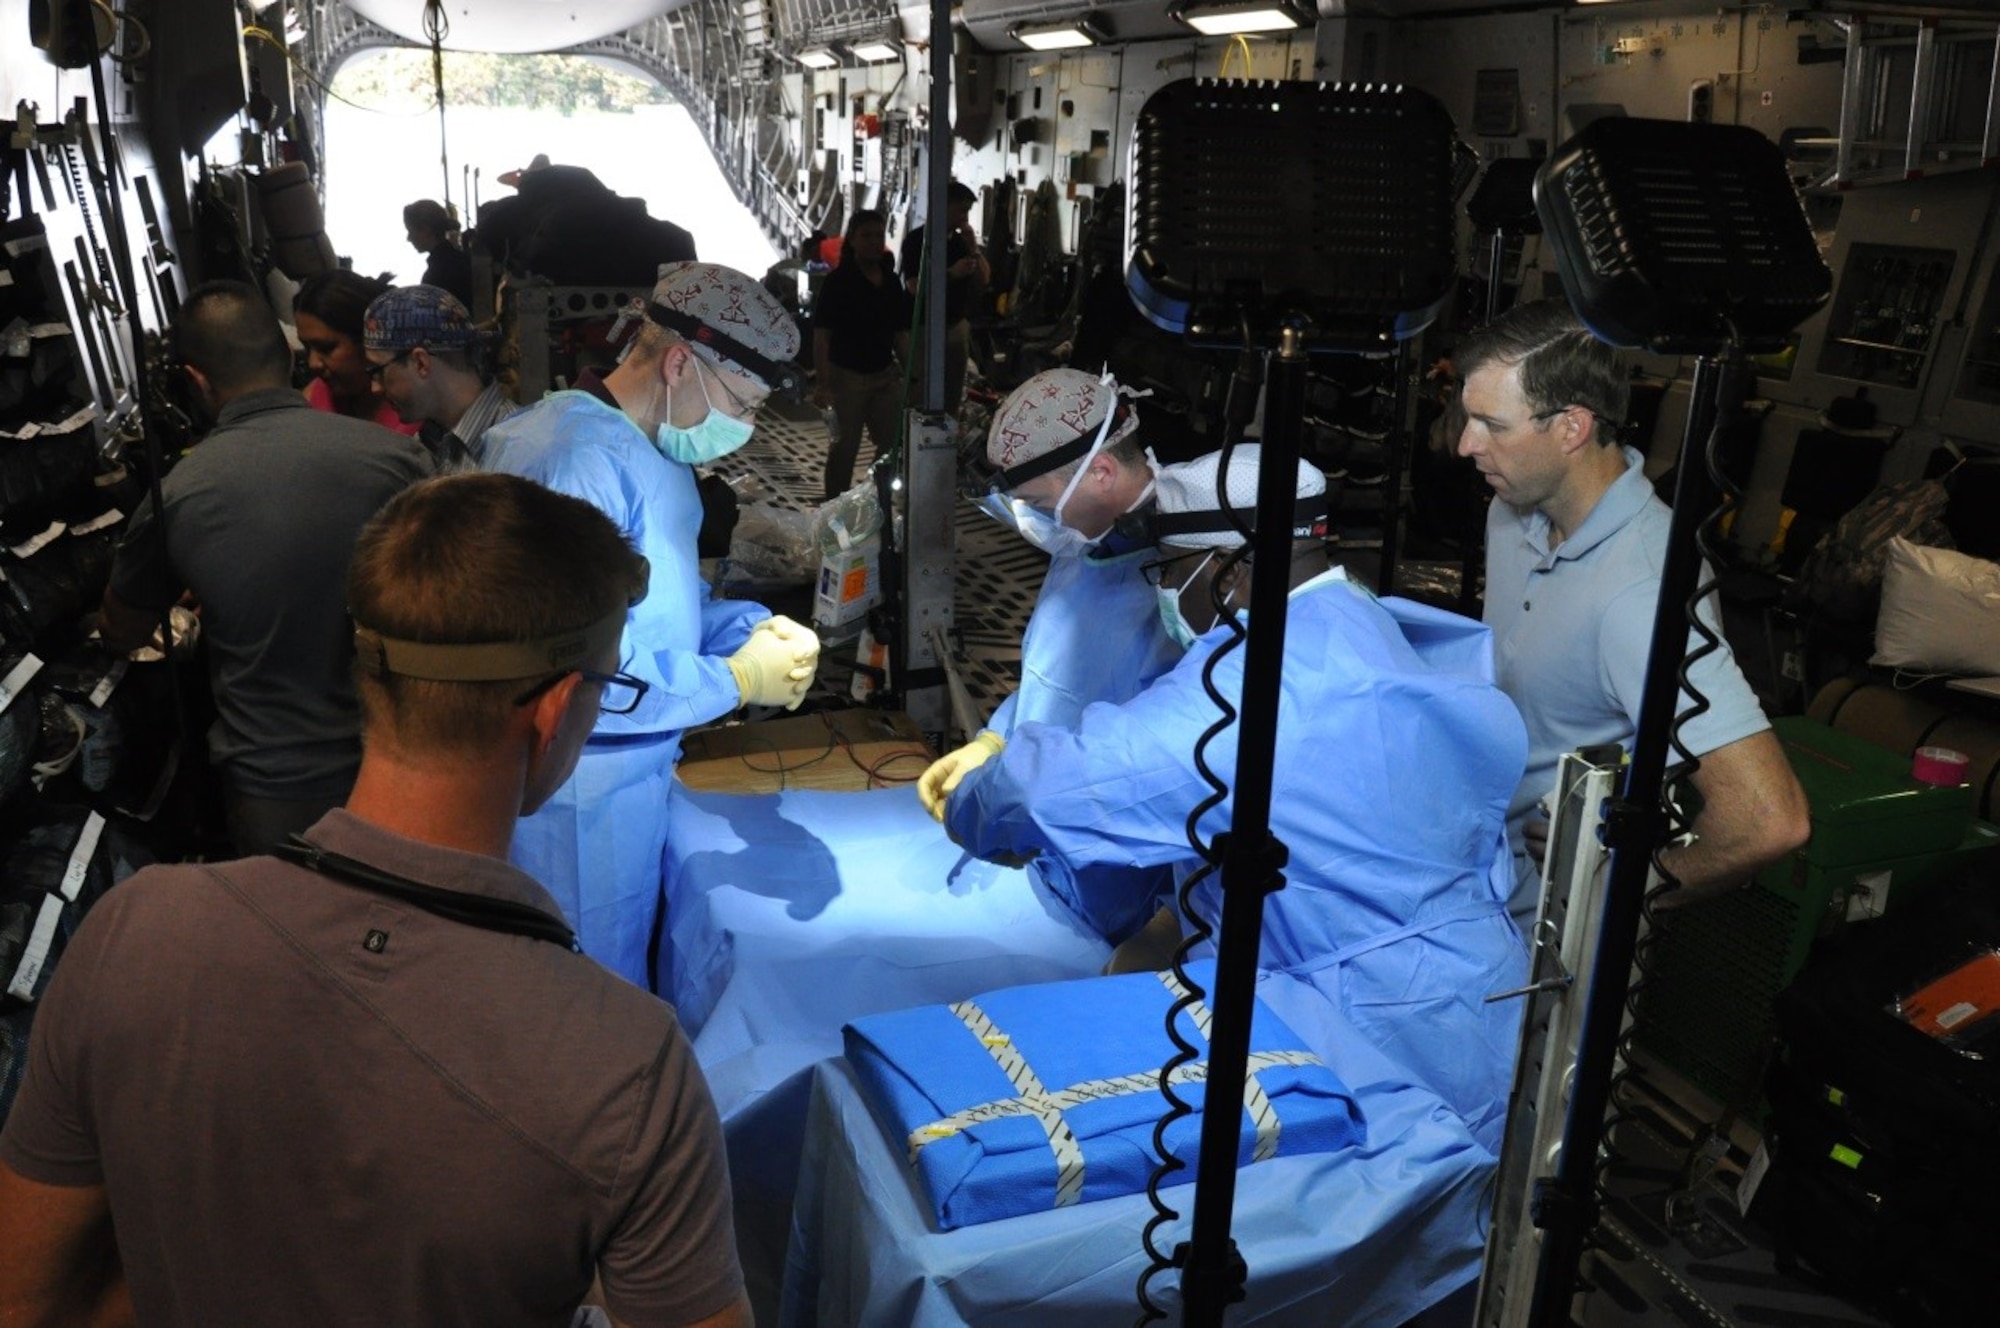 Medics from the 59th Medical Wing conduct a medical training exercise inside a C-17 Globemaster III on March 18, 2016, at the Havana International Airport, Cuba. A Tactical Critical Care Evacuation Team-Enhanced and a Critical Care Air Transport Team from the wing supported the first presidential visit to Cuba in nearly 90 years. The teams -- wearing civilian clothes for security -- were part of Defense Department, White House and State Department emergency response systems. (U.S. Air Force photo/Maj. Howard Blackwell)